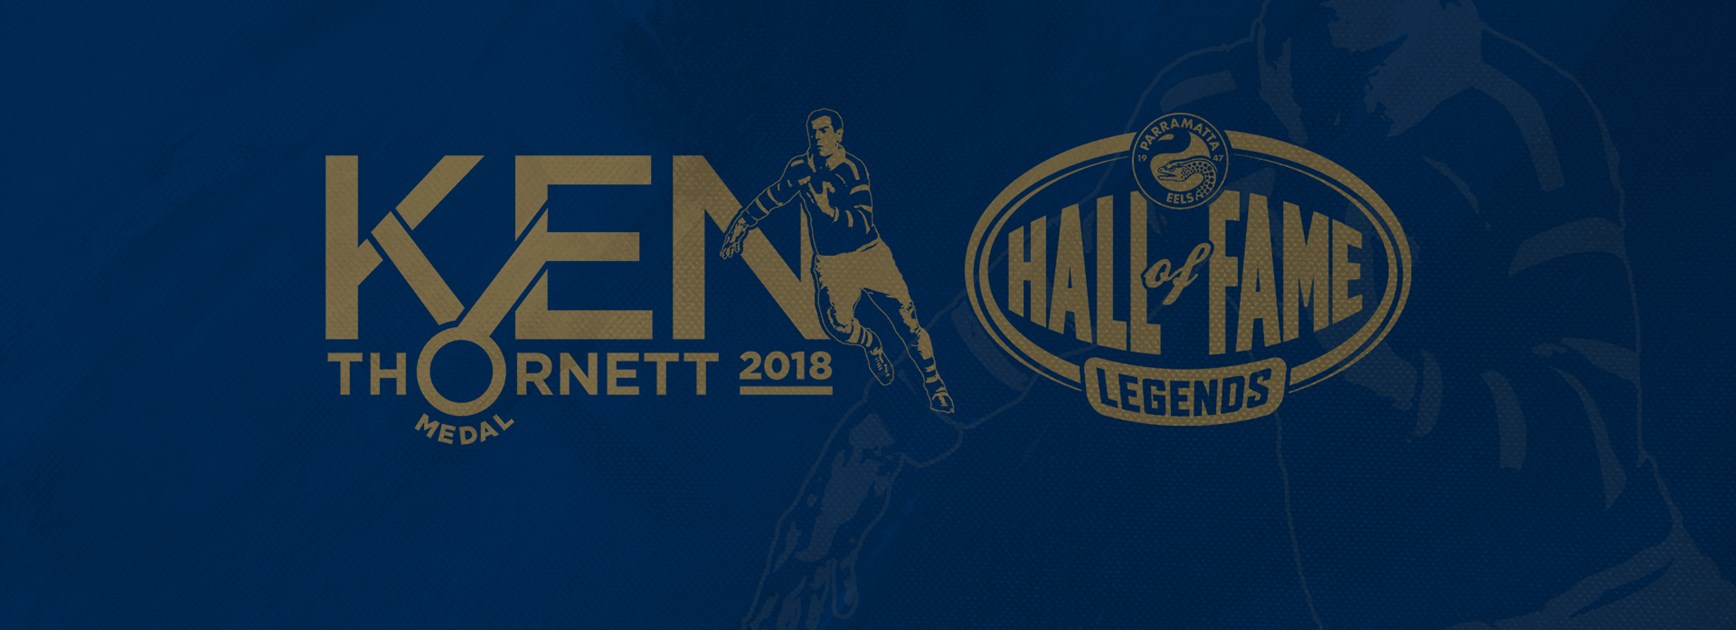 Eels to induct legend into Hall of Fame